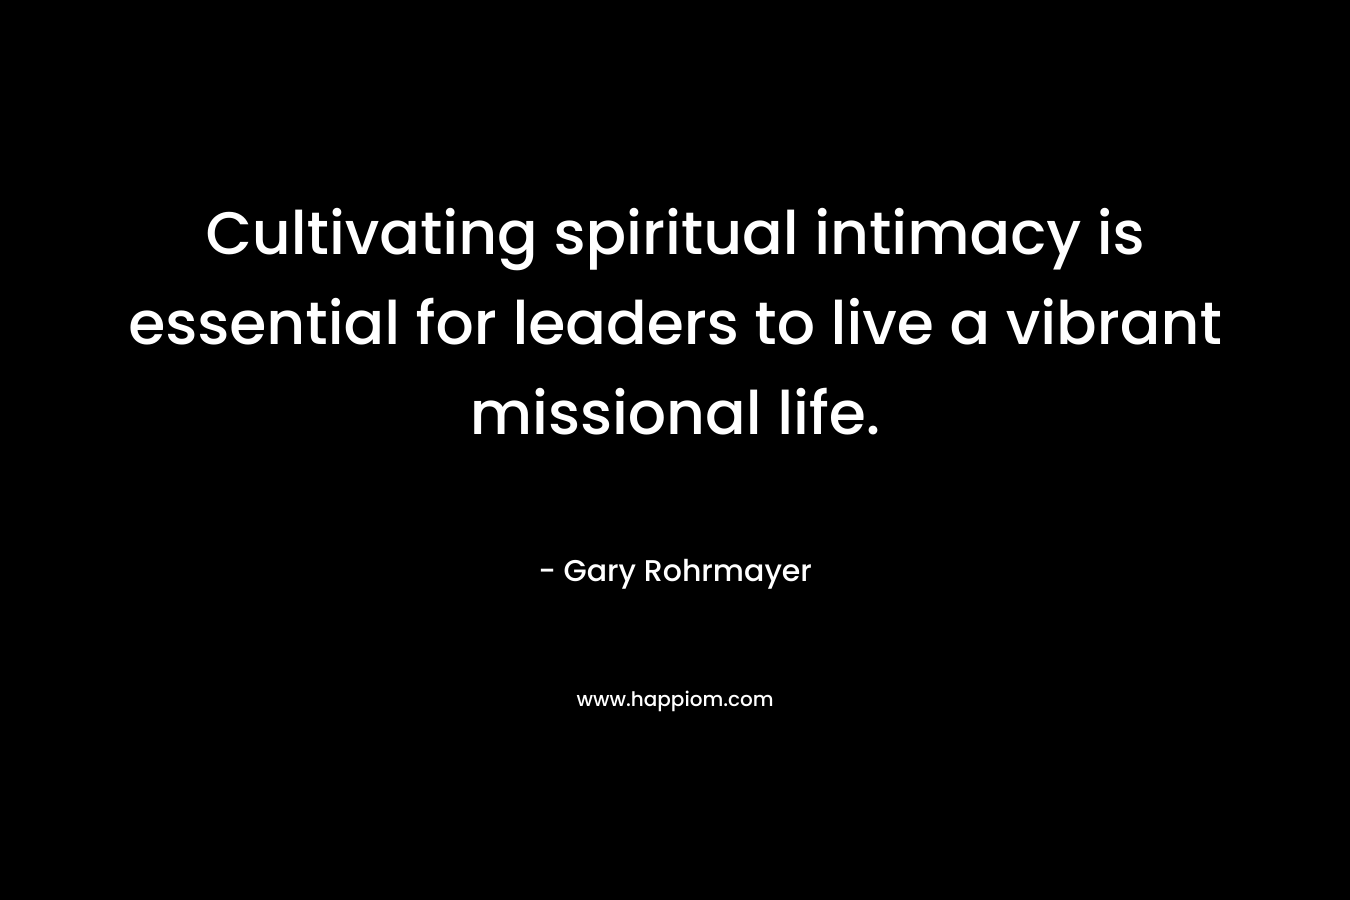 Cultivating spiritual intimacy is essential for leaders to live a vibrant missional life.